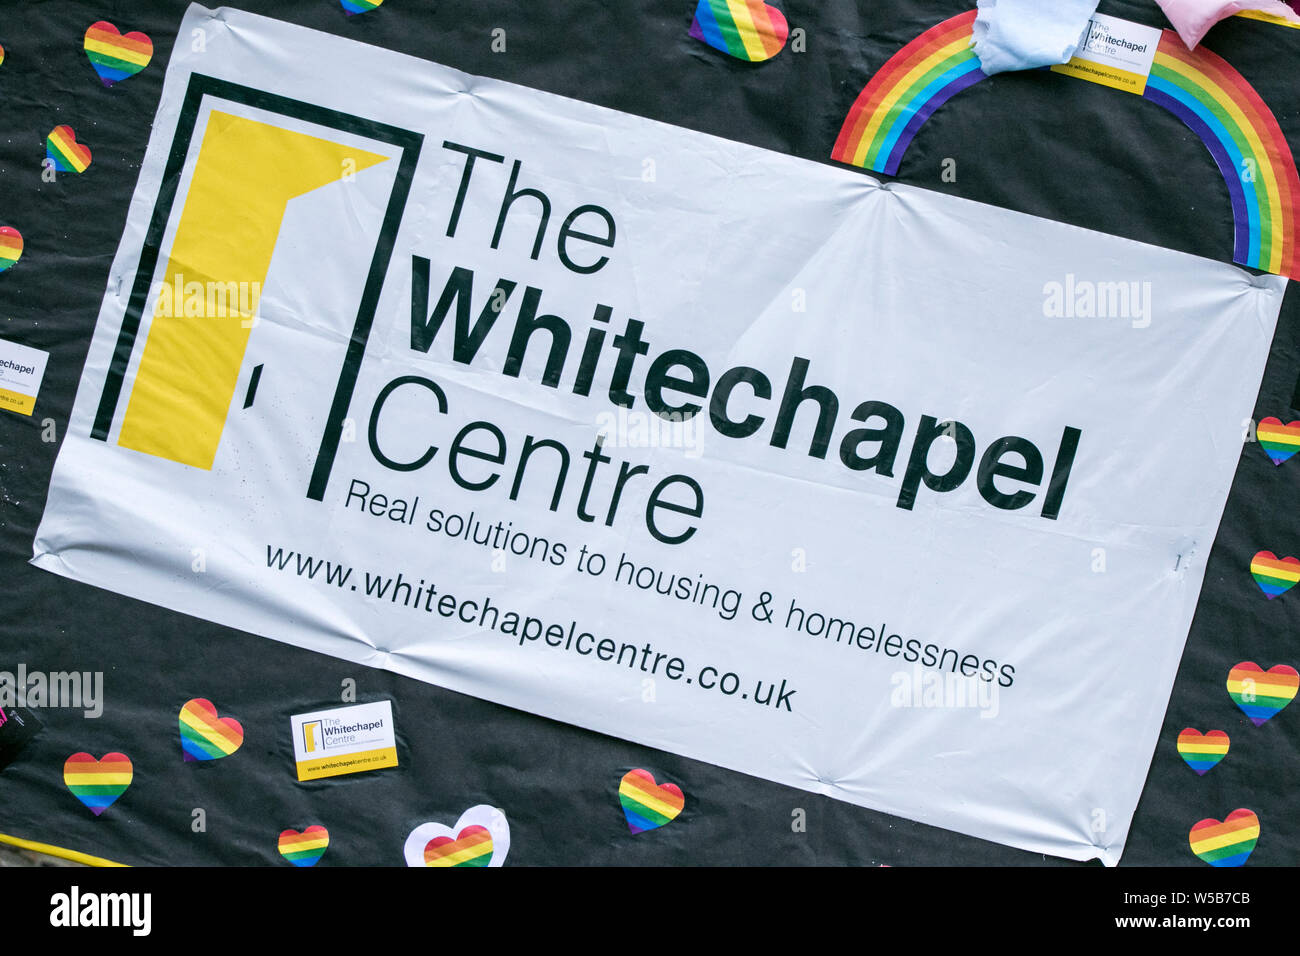 The Whitechapel Centre offering help with housing for homeless people Stock Photo